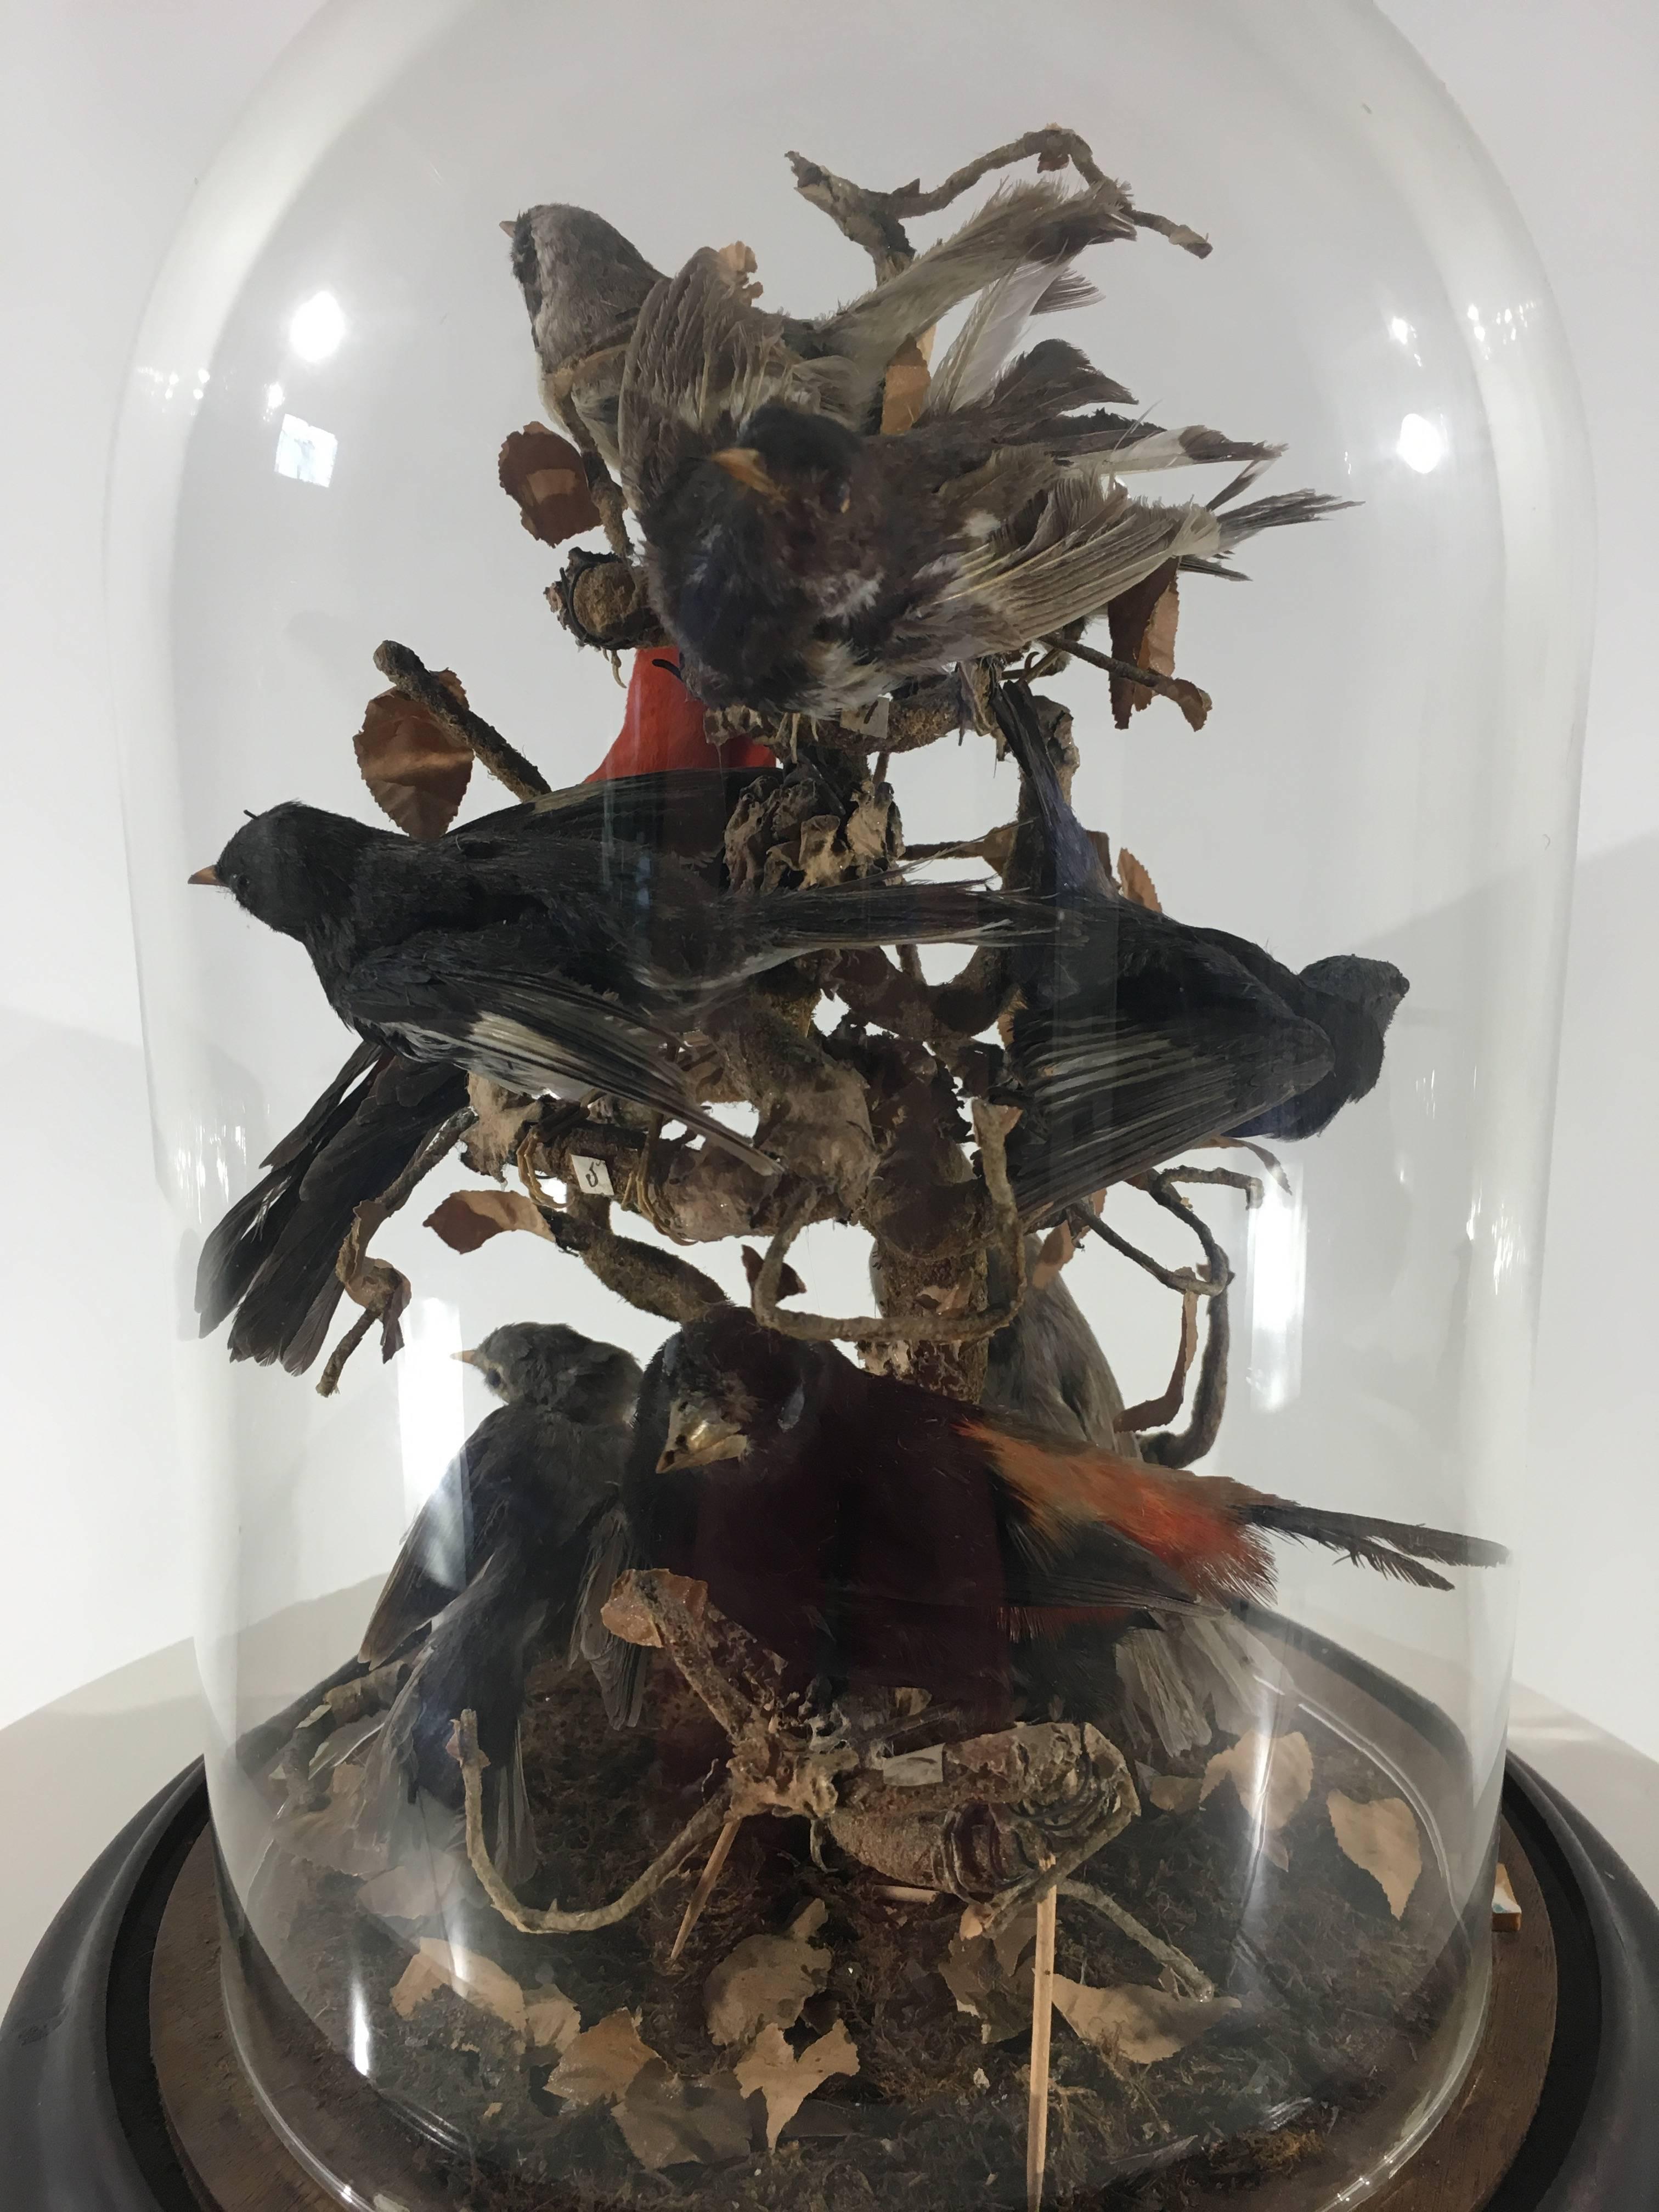 A domed case of taxidermy exotic birds on original ebony base.
Contains nine beautiful birds mounted on branch.
Dome is smaller than base ring so stoppers were added.
Measure: Dome diameter 8